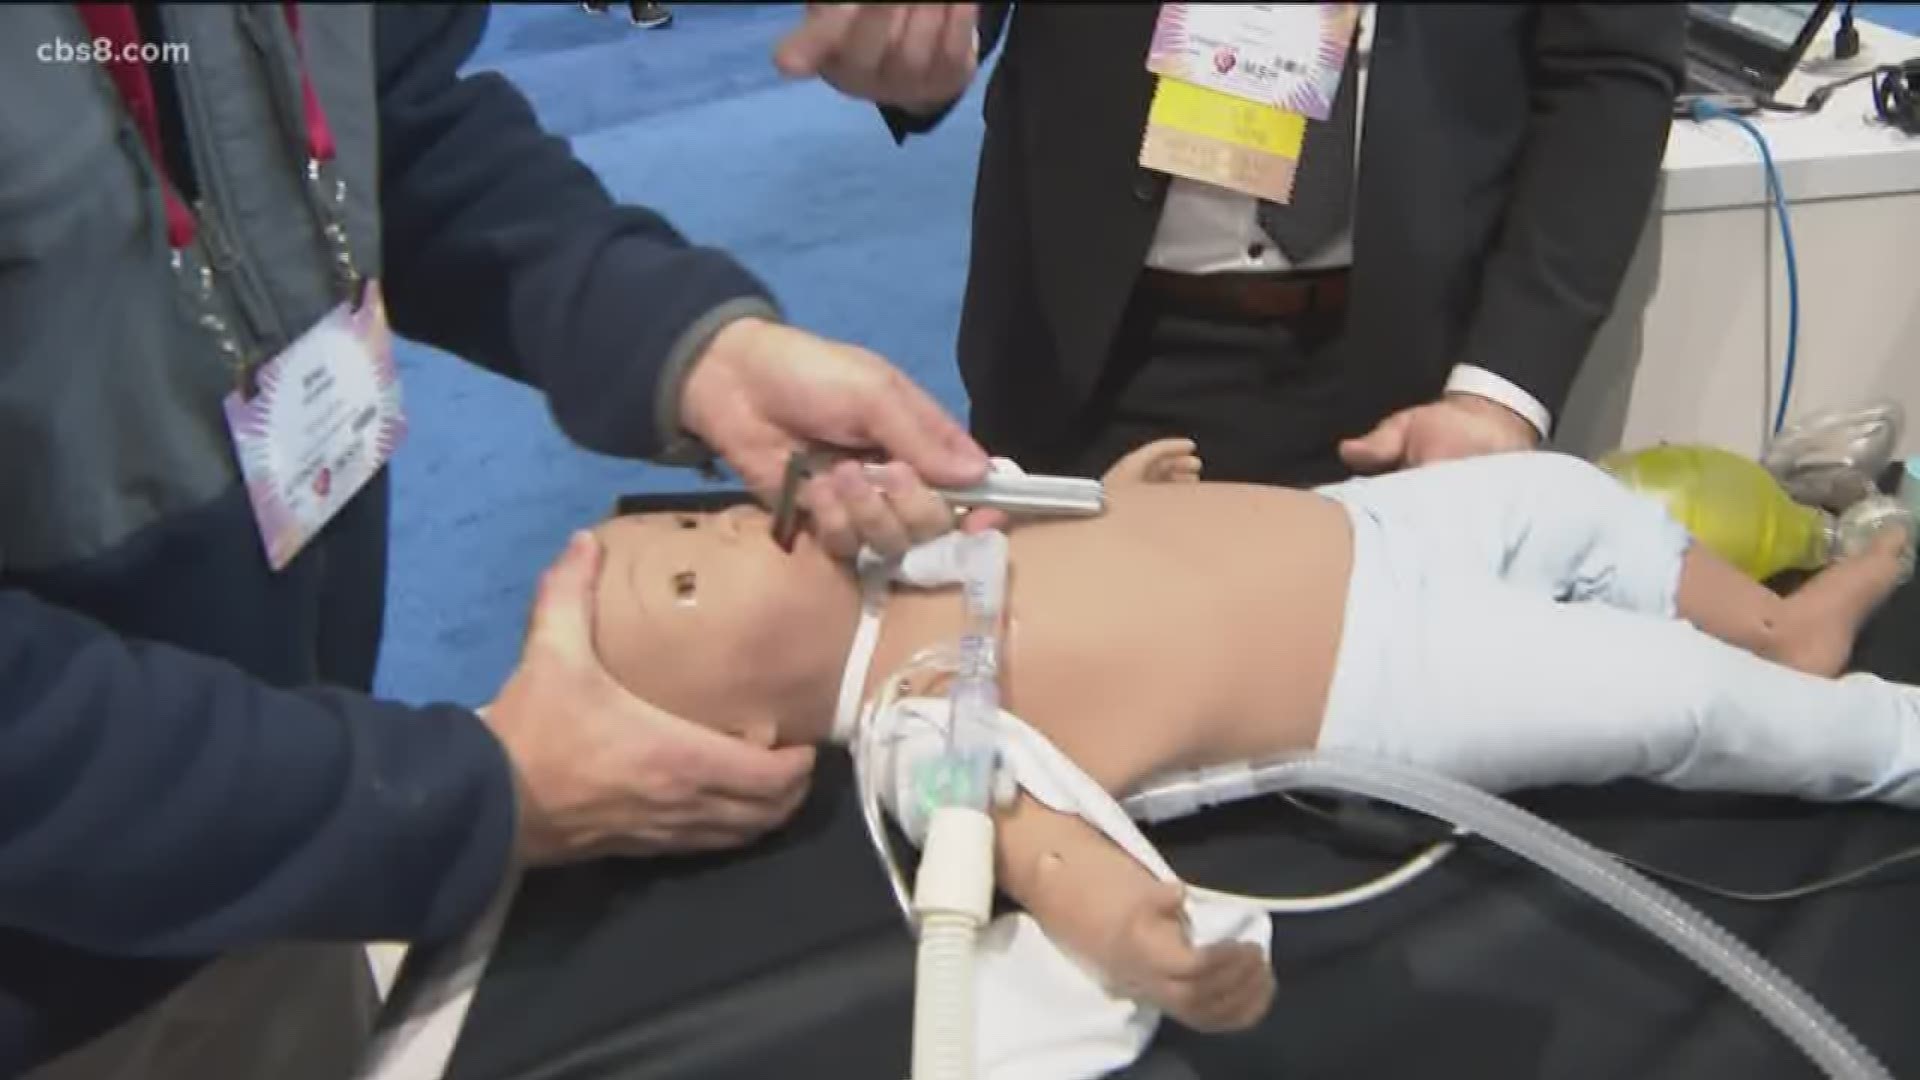 State-of-the-art software and mannequins are taking the medical field to the next level.